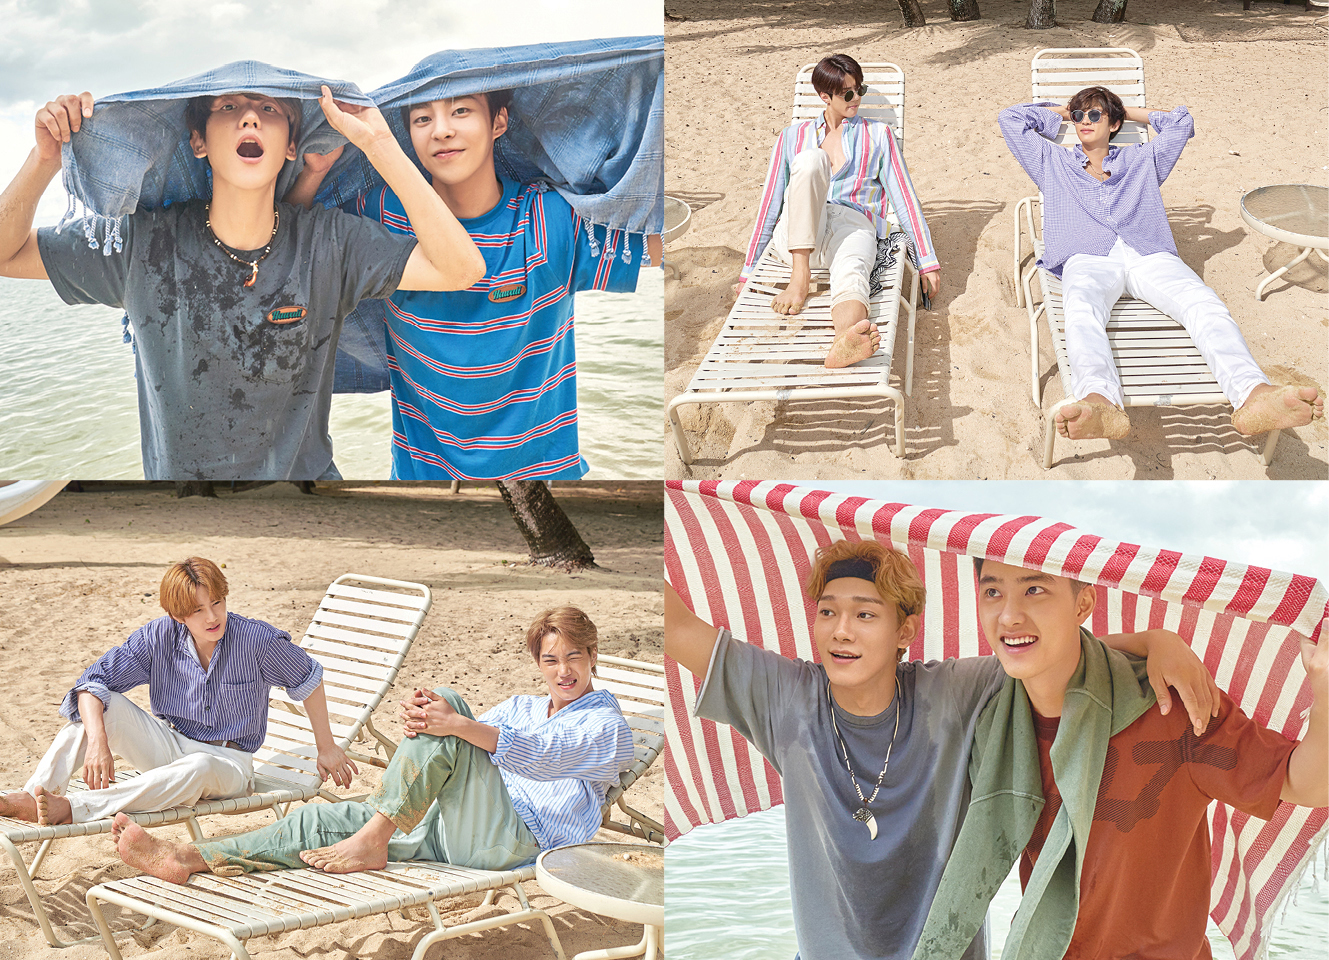 The second Hawaii photo book of EXO (EXO) which can feel youth is revealed.EXOs second Hawaii photo album Freegent ; The Moment (PRESENT ; the moment) will be released on September 10th.This photo book is a pleasant and energetic appearance of EXO members (Suho, Chanyeol, Kai, Dio, Baekhyun, Sehun, Siu Min, Chen, Lay) who travel around Hawaiii and enjoy the moments of youth in their 20s.In addition, Freegent ; The Moment is available for reservation purchase at various on-line and offline music stores from today (22nd).On the other hand, EXO will hold EXO Planet # 5 - Explosion - In Manila (EXO PLANET # 5 - EXpLOration - in MANILA) at Manila Mall of Asia Arena in the Philippines on the 23rd and 24th.Photos from SM Entertainment